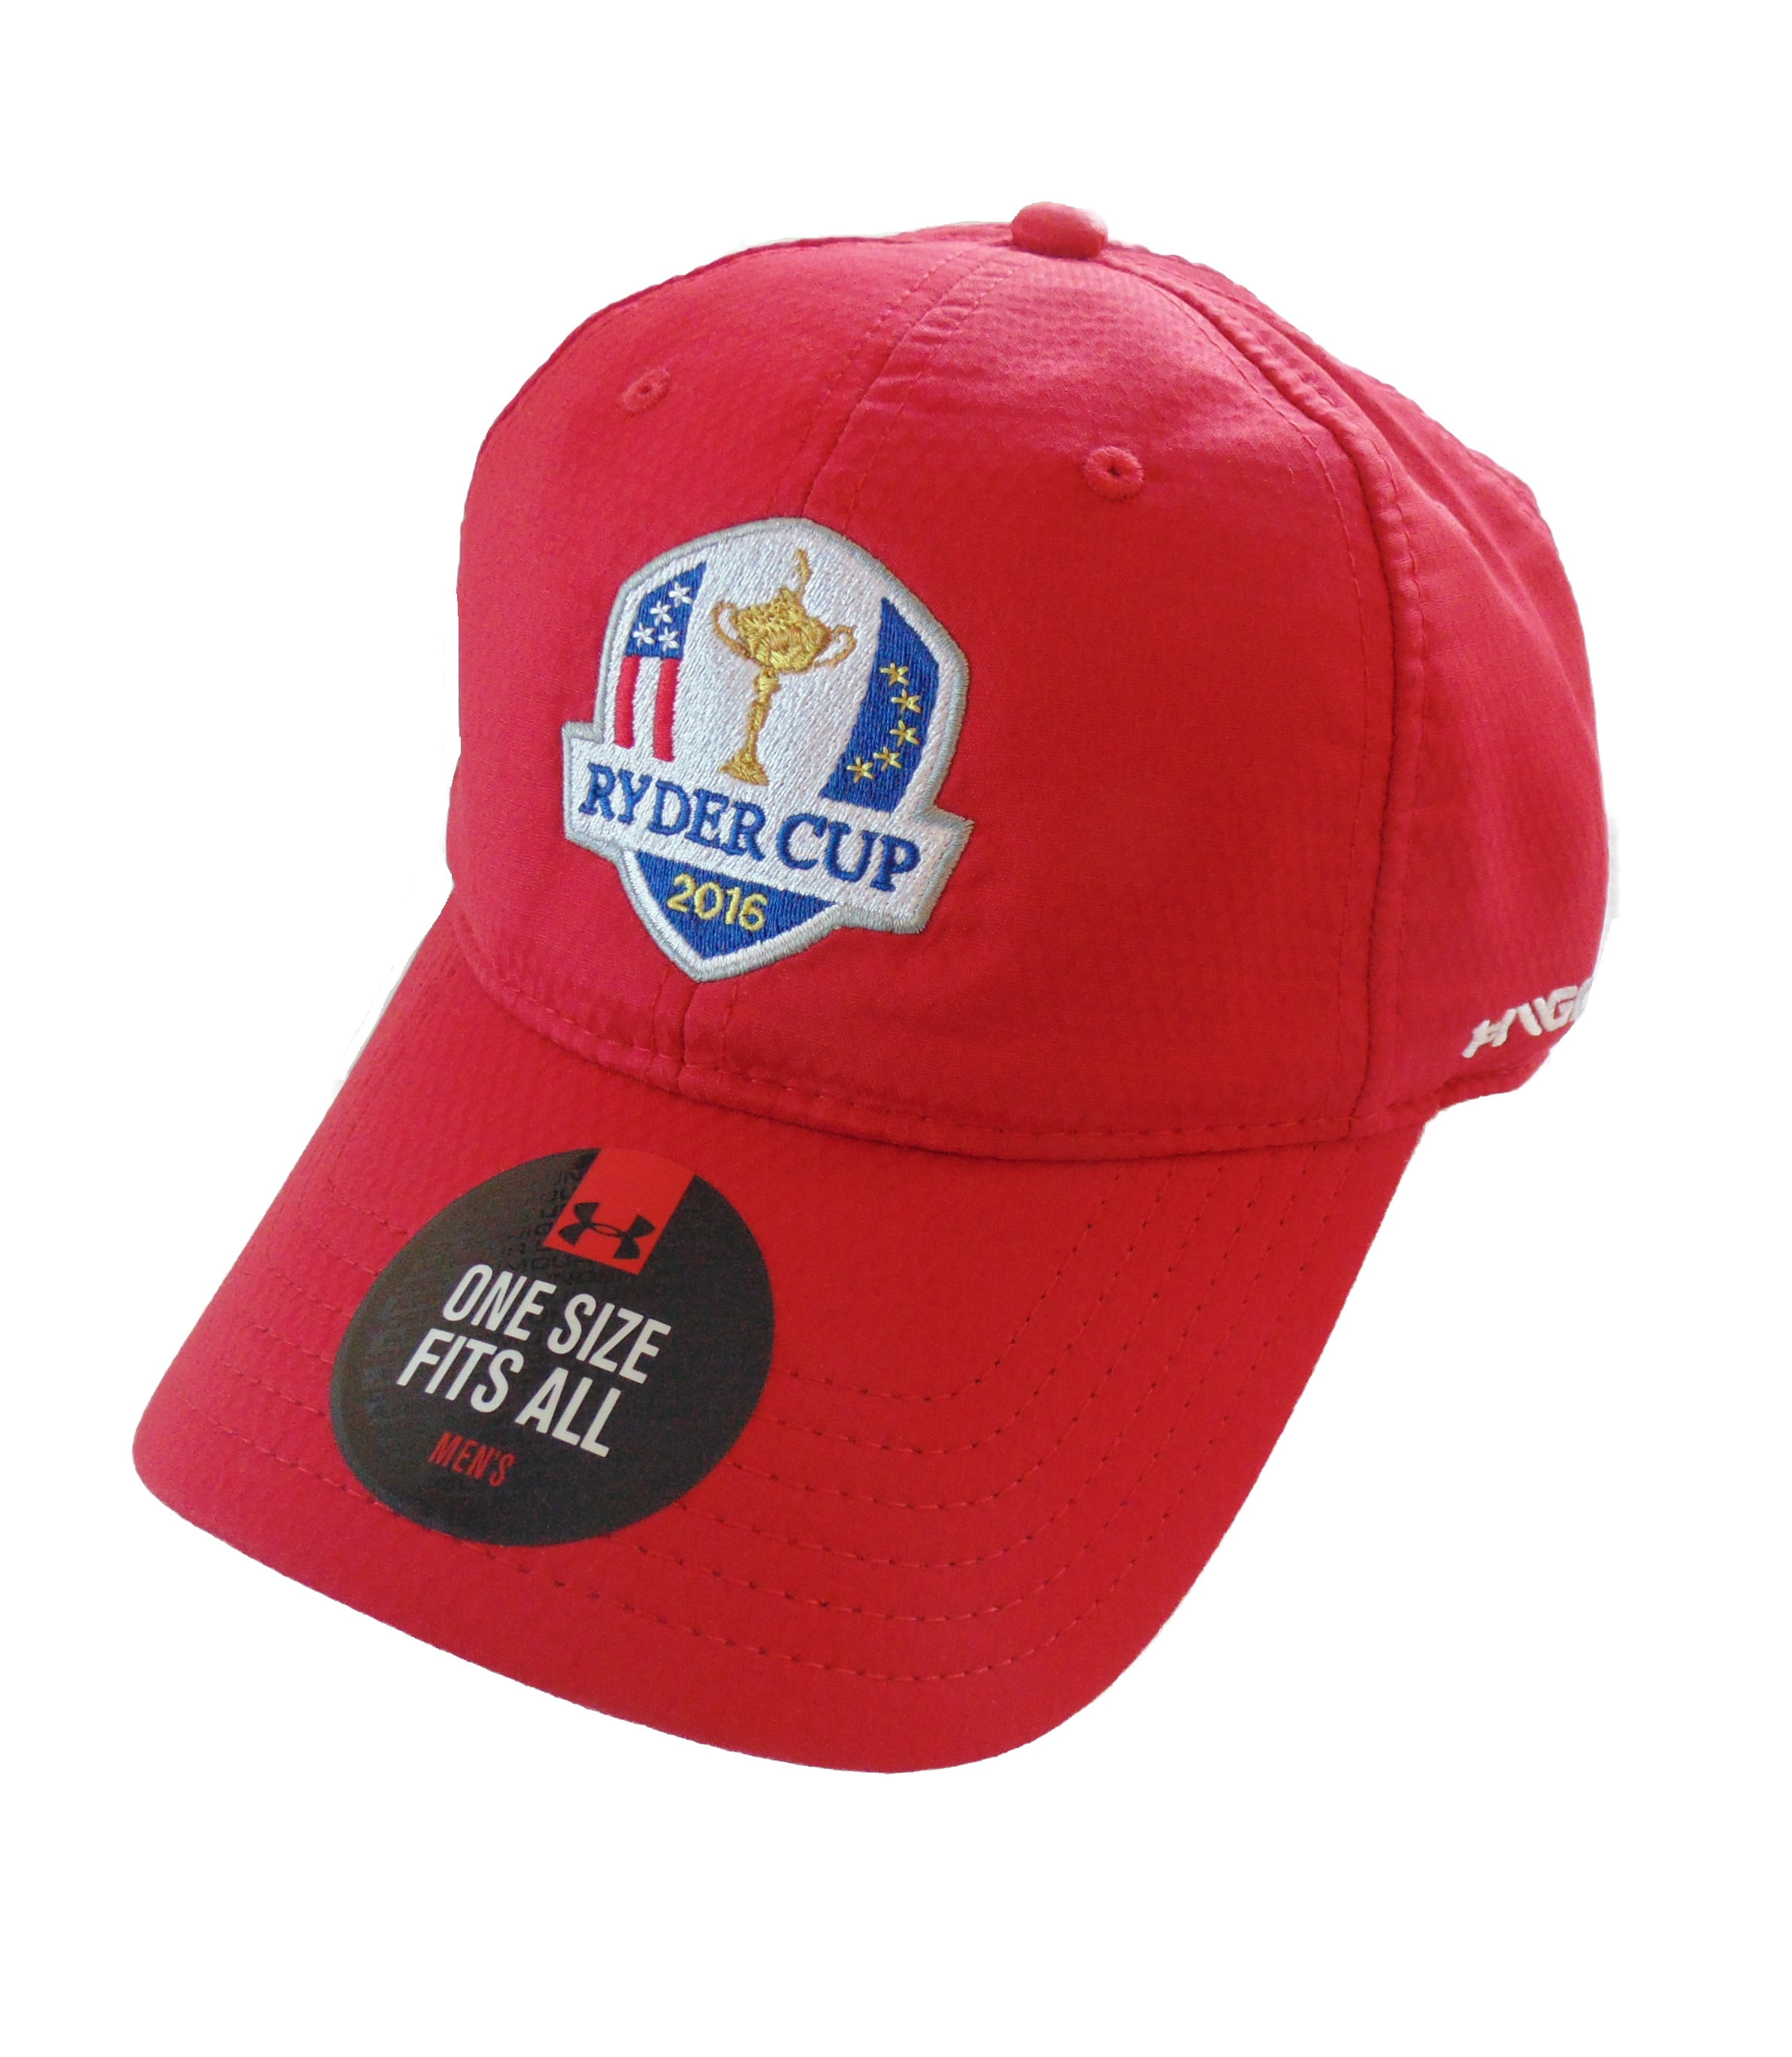 2016 ryder cup hats